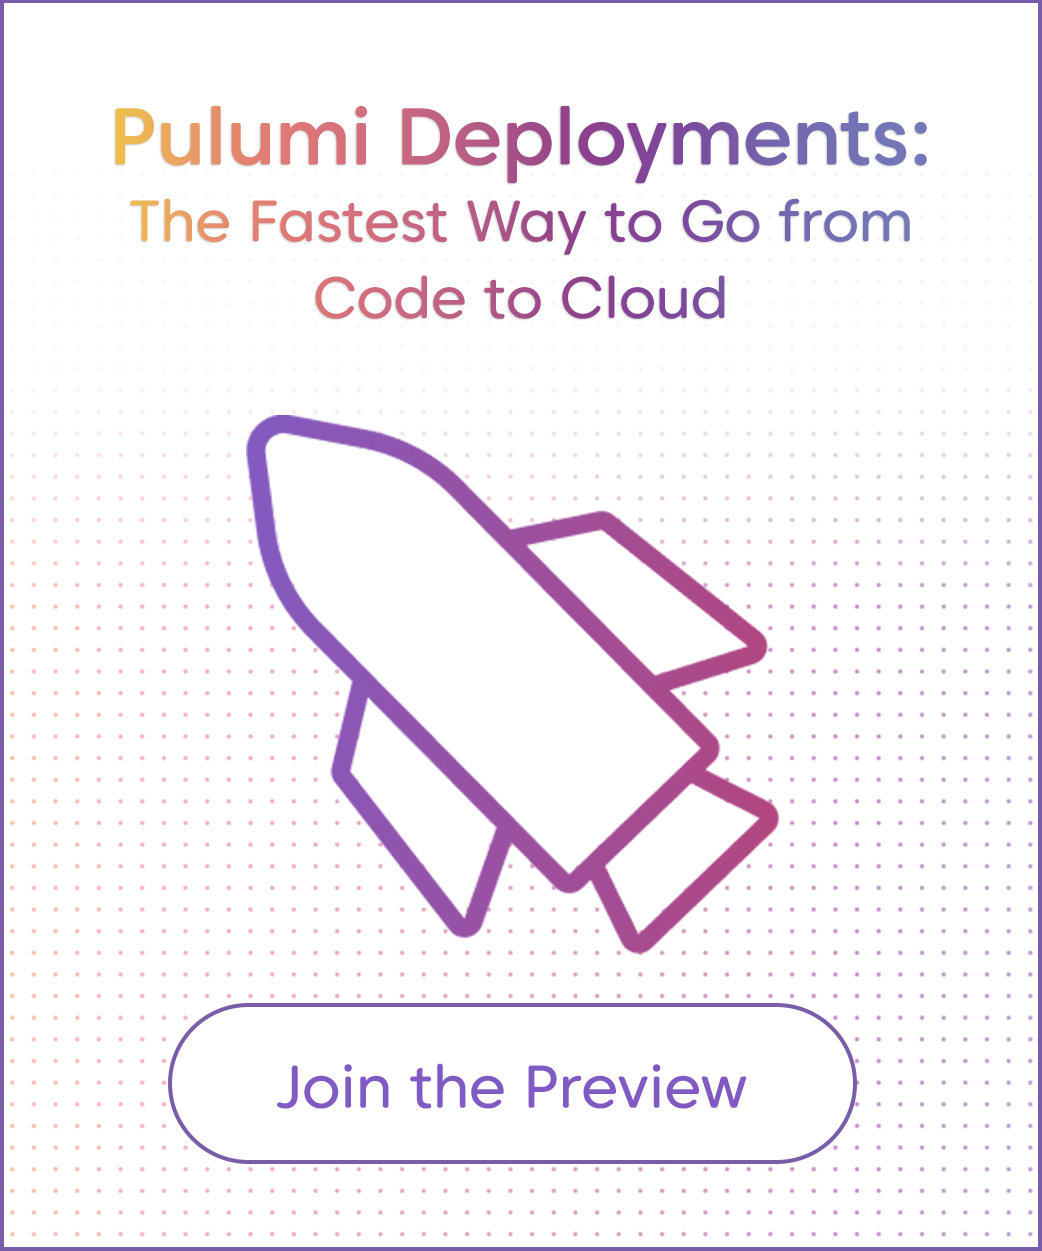 Pulumi Deployments: the fastest way to go from code to cloud. Join the Preview